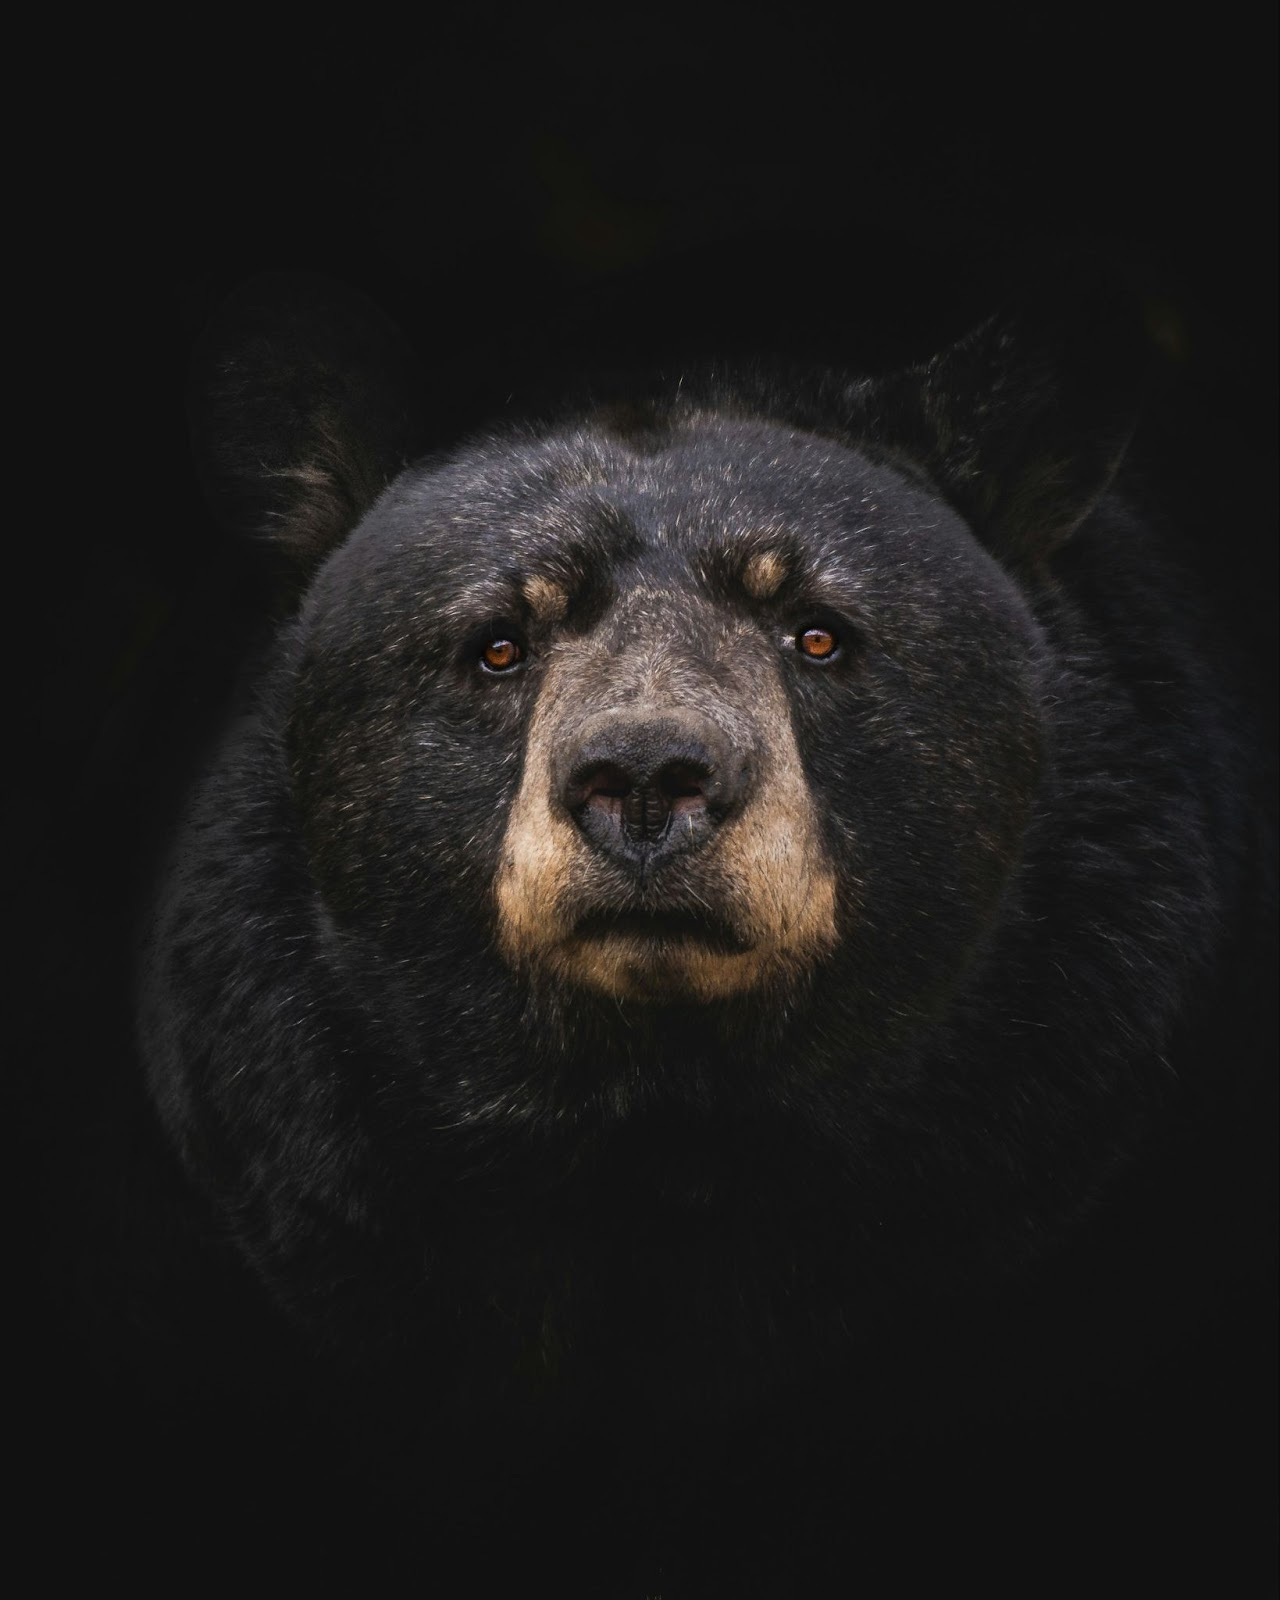 Head shot of black bear staring straight ahead surrounded by black